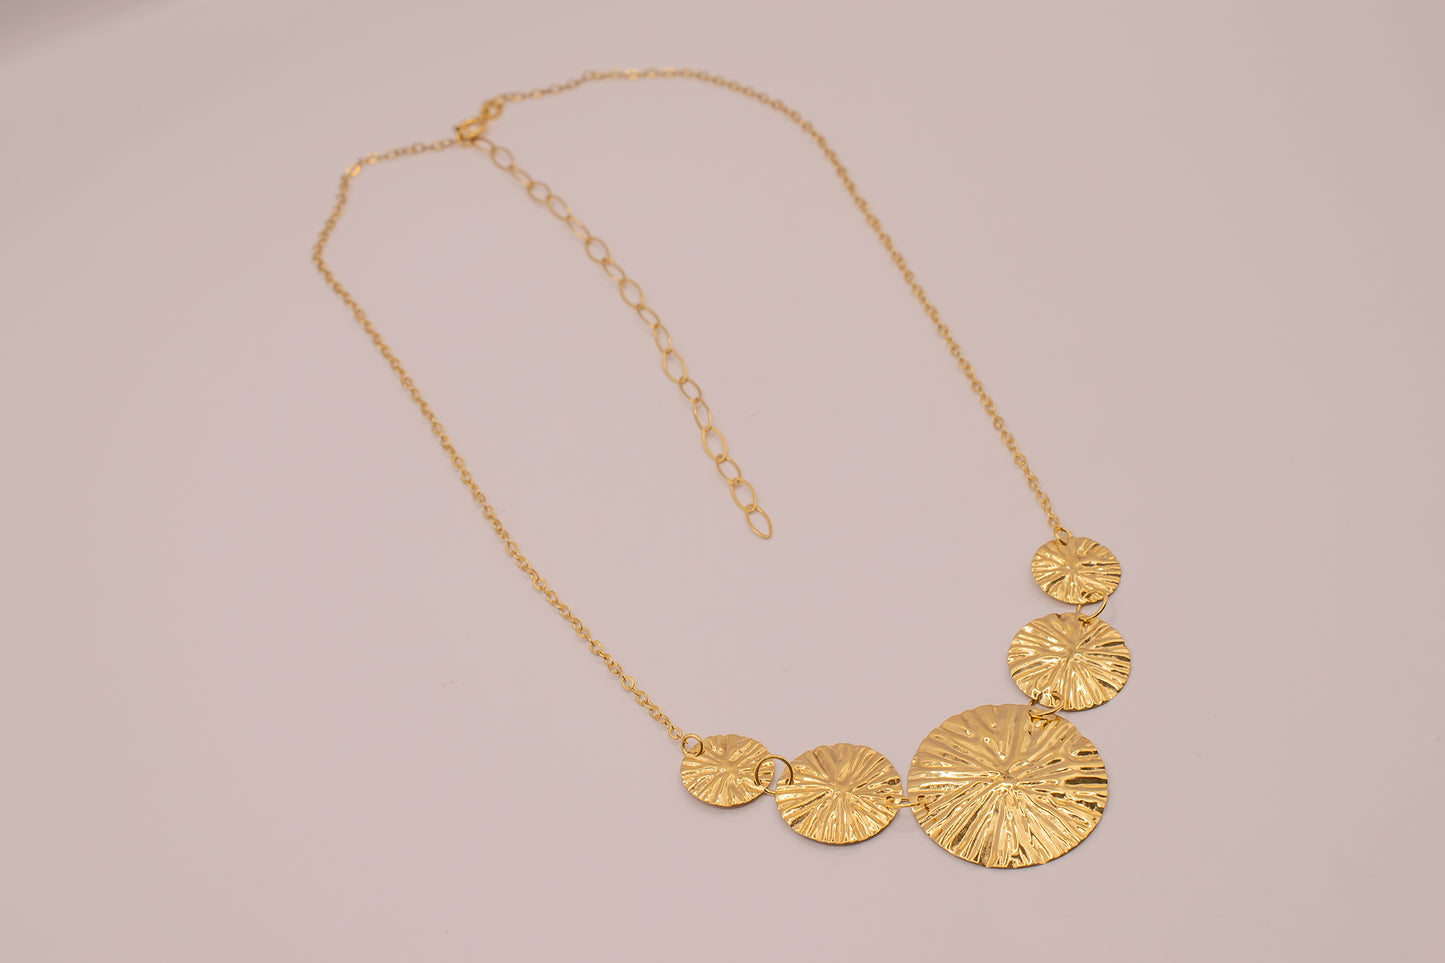 Vintage Estate 14k Yellow Gold Milor Italy Sun Disc Stationary Adjustable Length Necklace